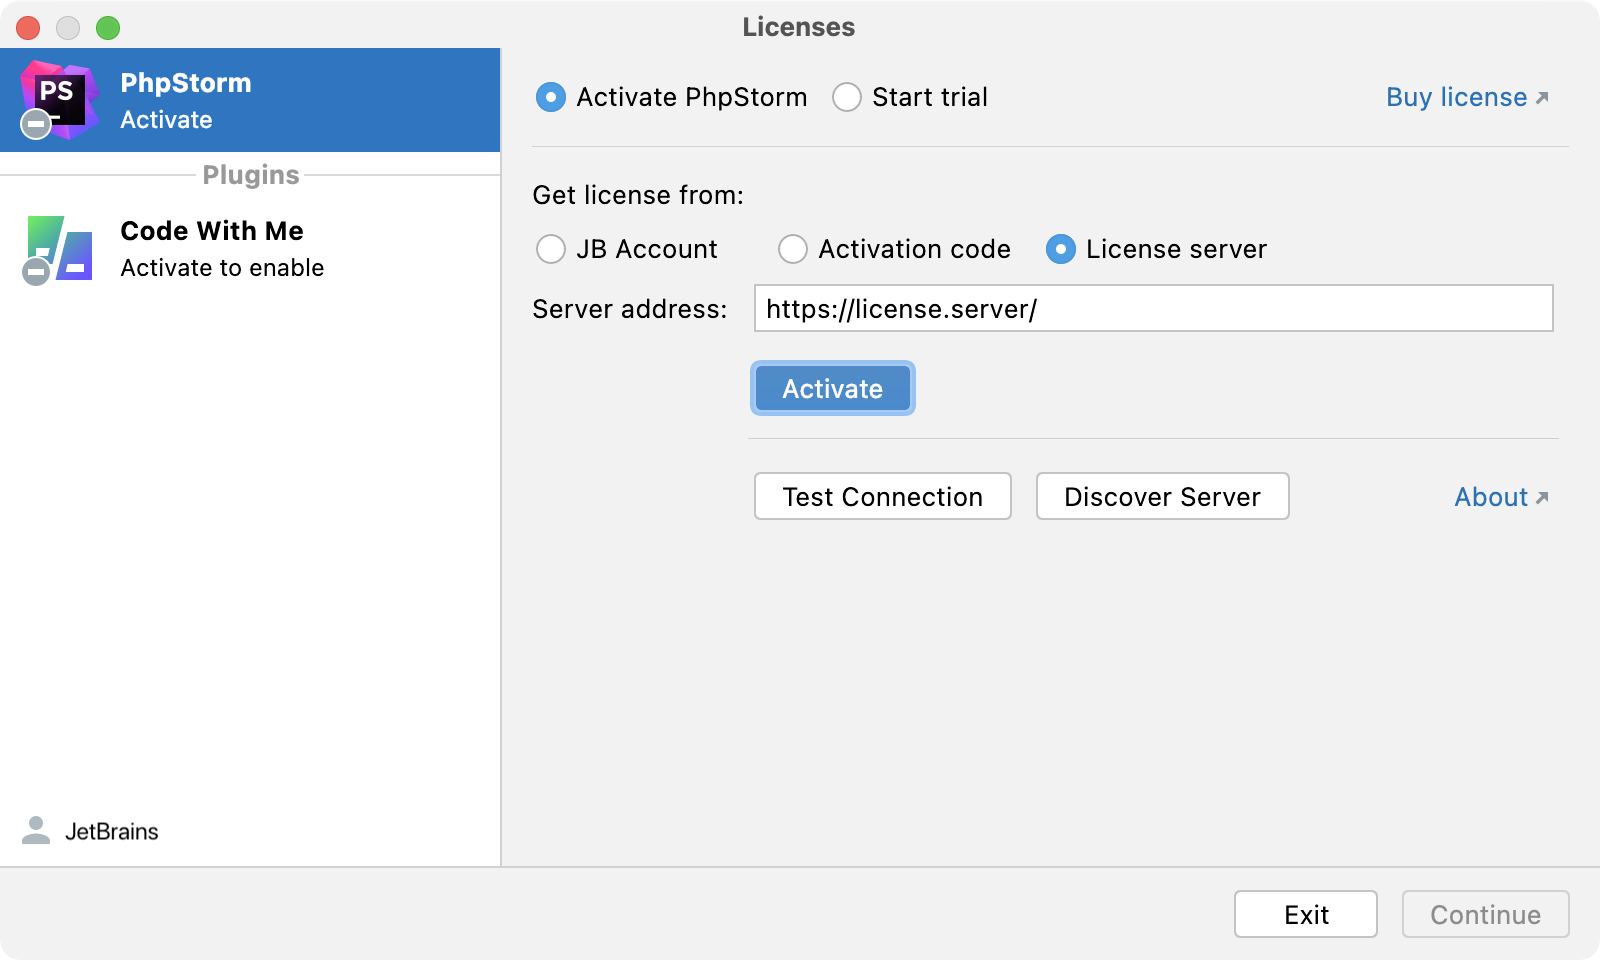 Activate PhpStorm license with a license server